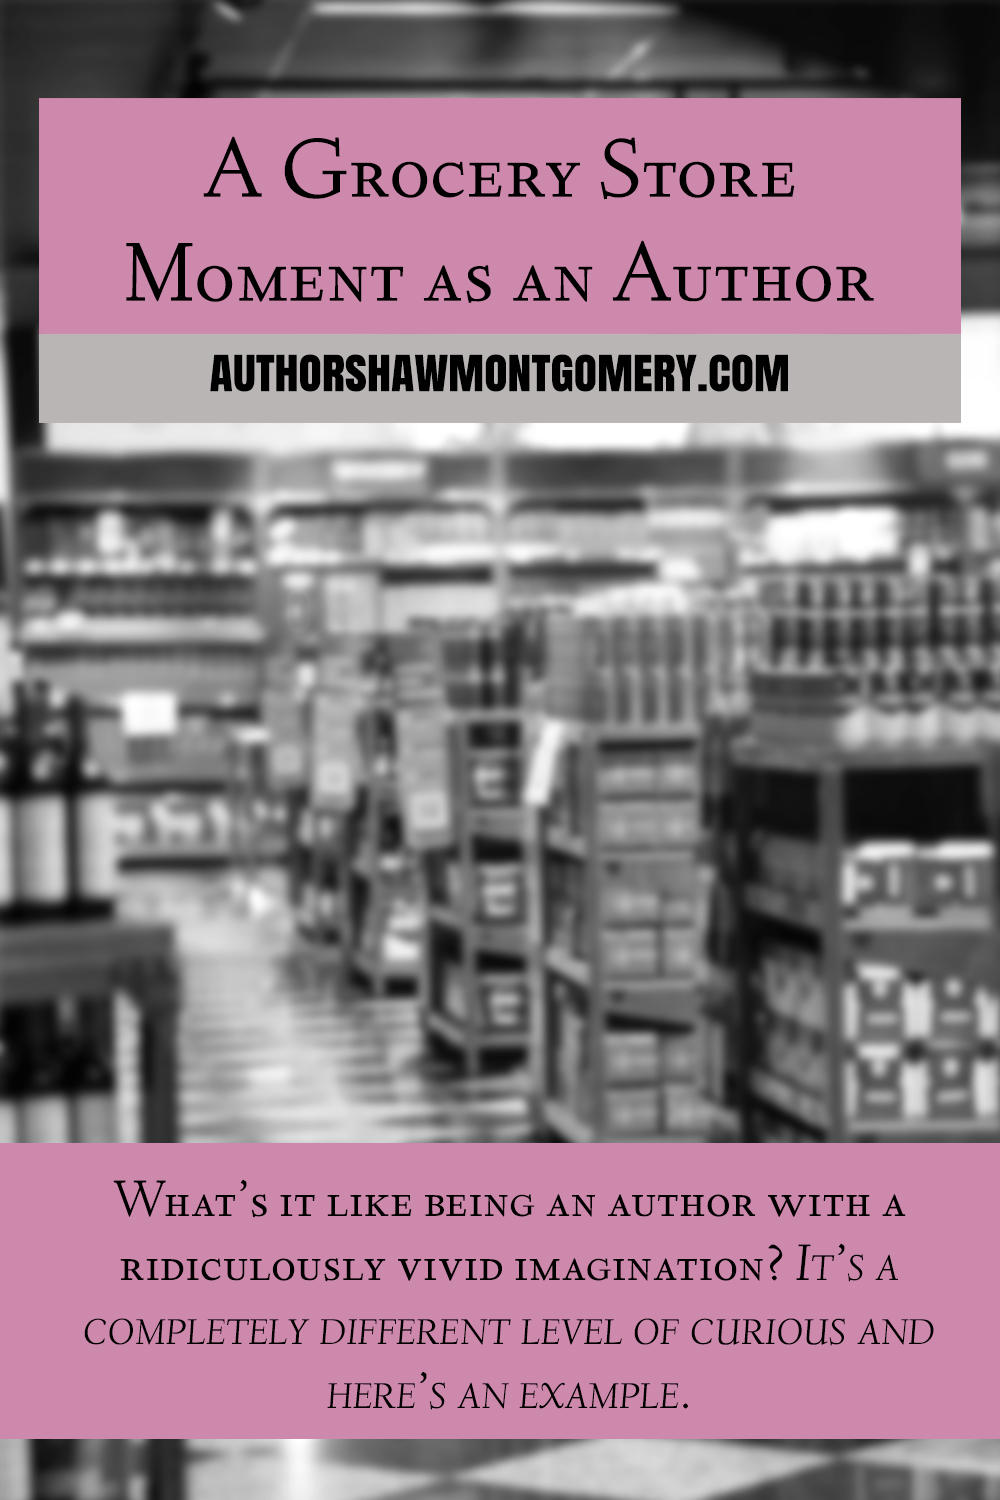 A Grocery Store Moment as an Author by Shaw Montgomery/MA Innes at authorshawmontgomery.com